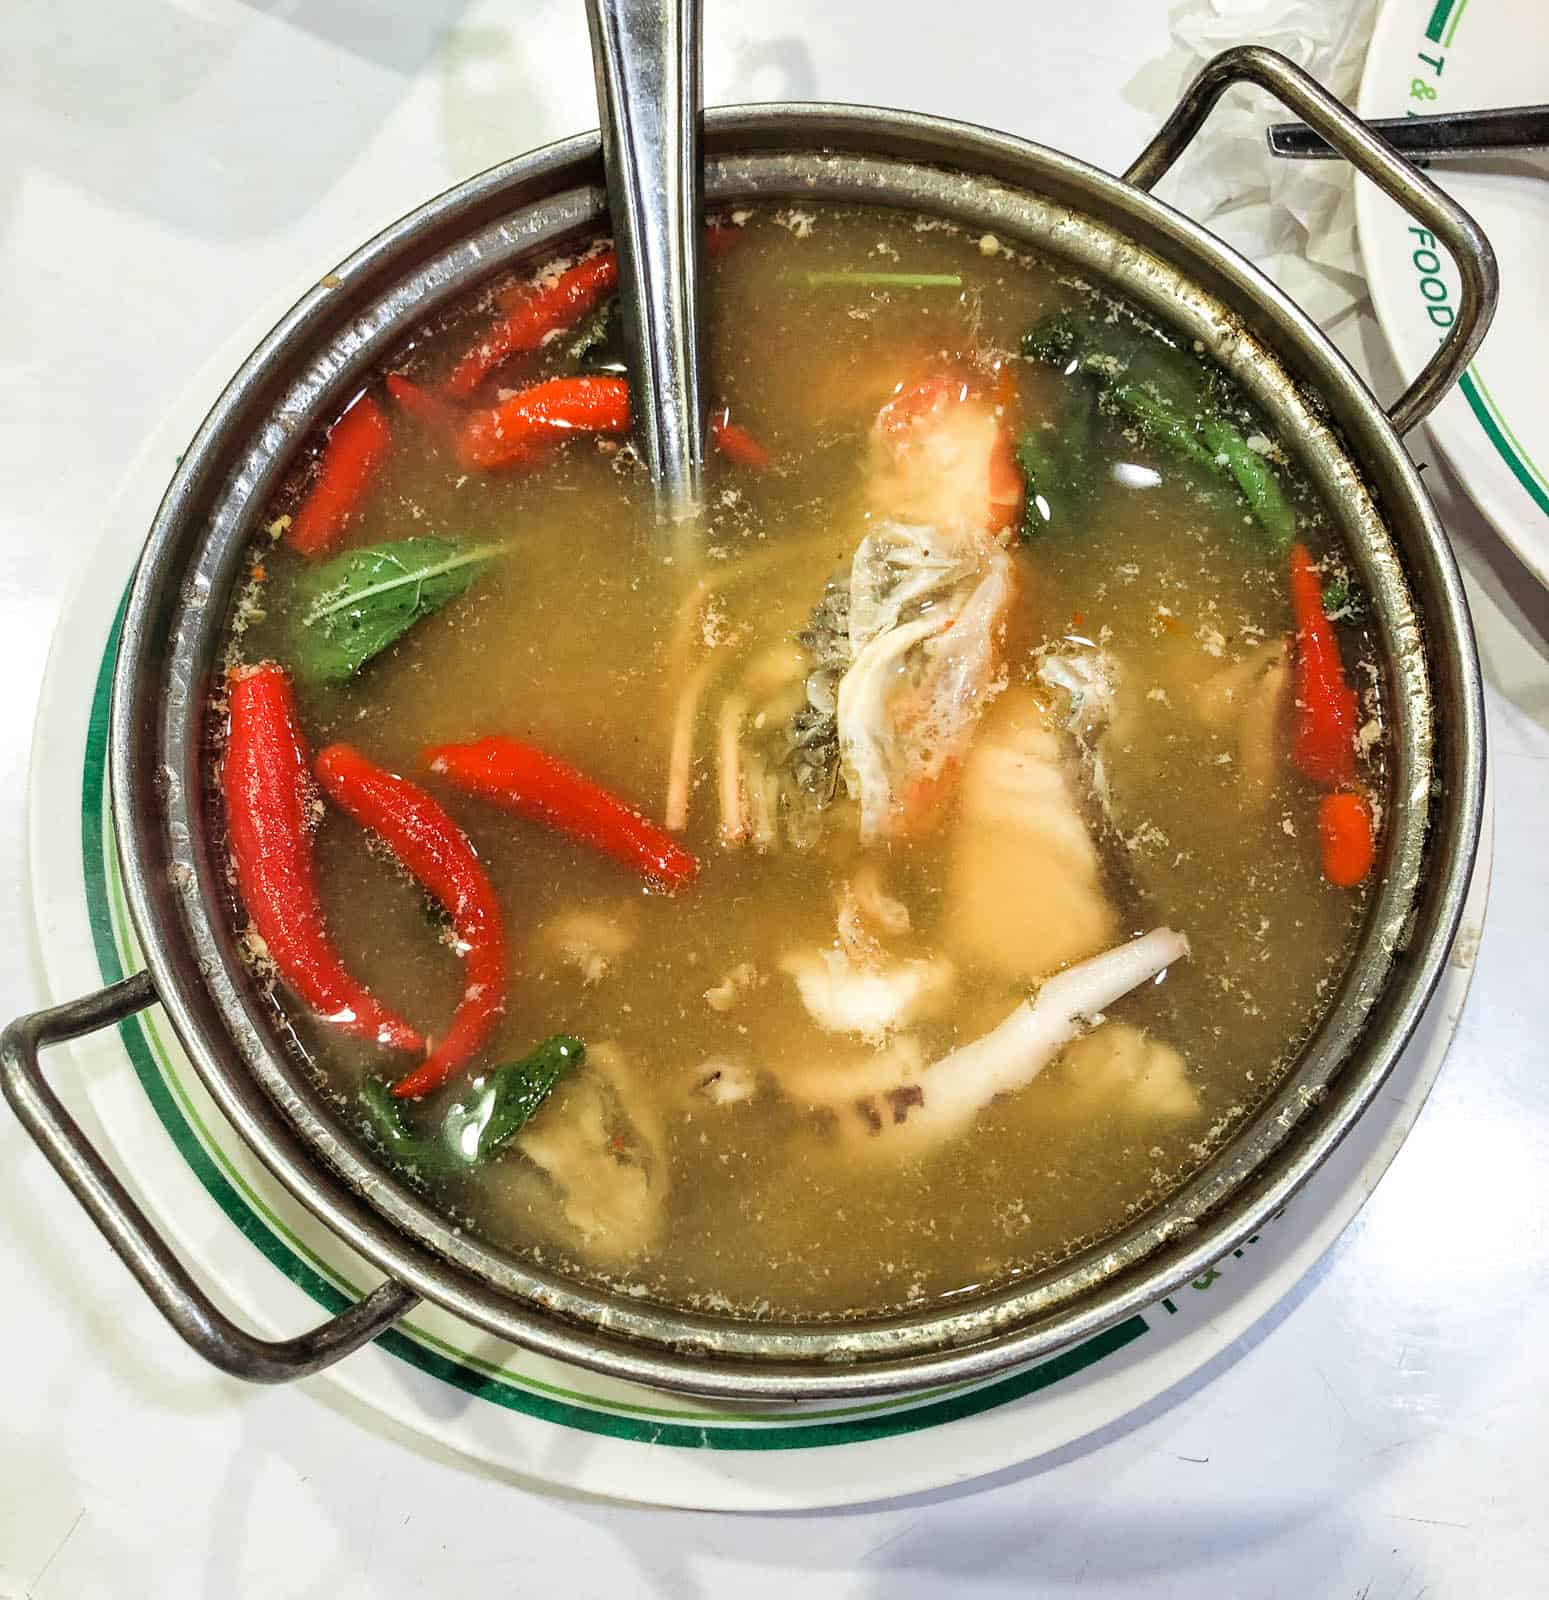 A bowl of soup on Yaowarat Road food tour in Bangkok's Chinatown - Best Things To Do in Bangkok